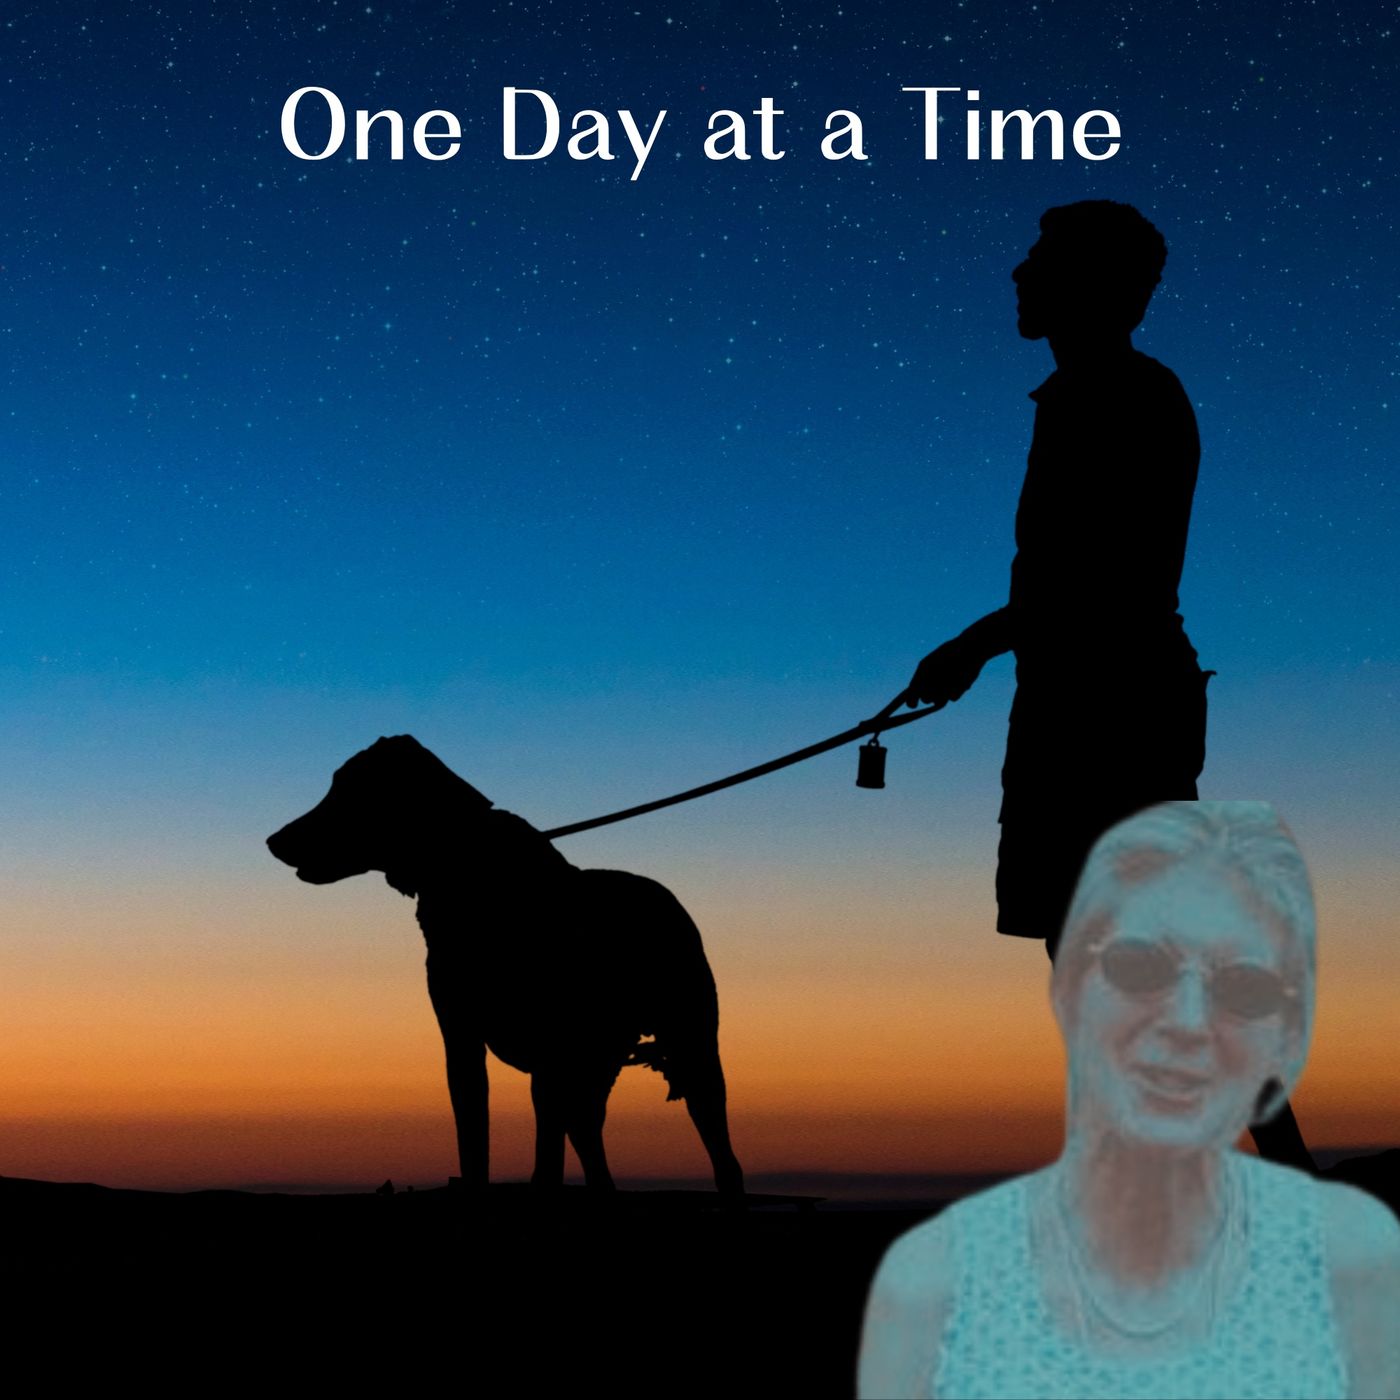 One Day at a Time: The Disappearance of Edith 